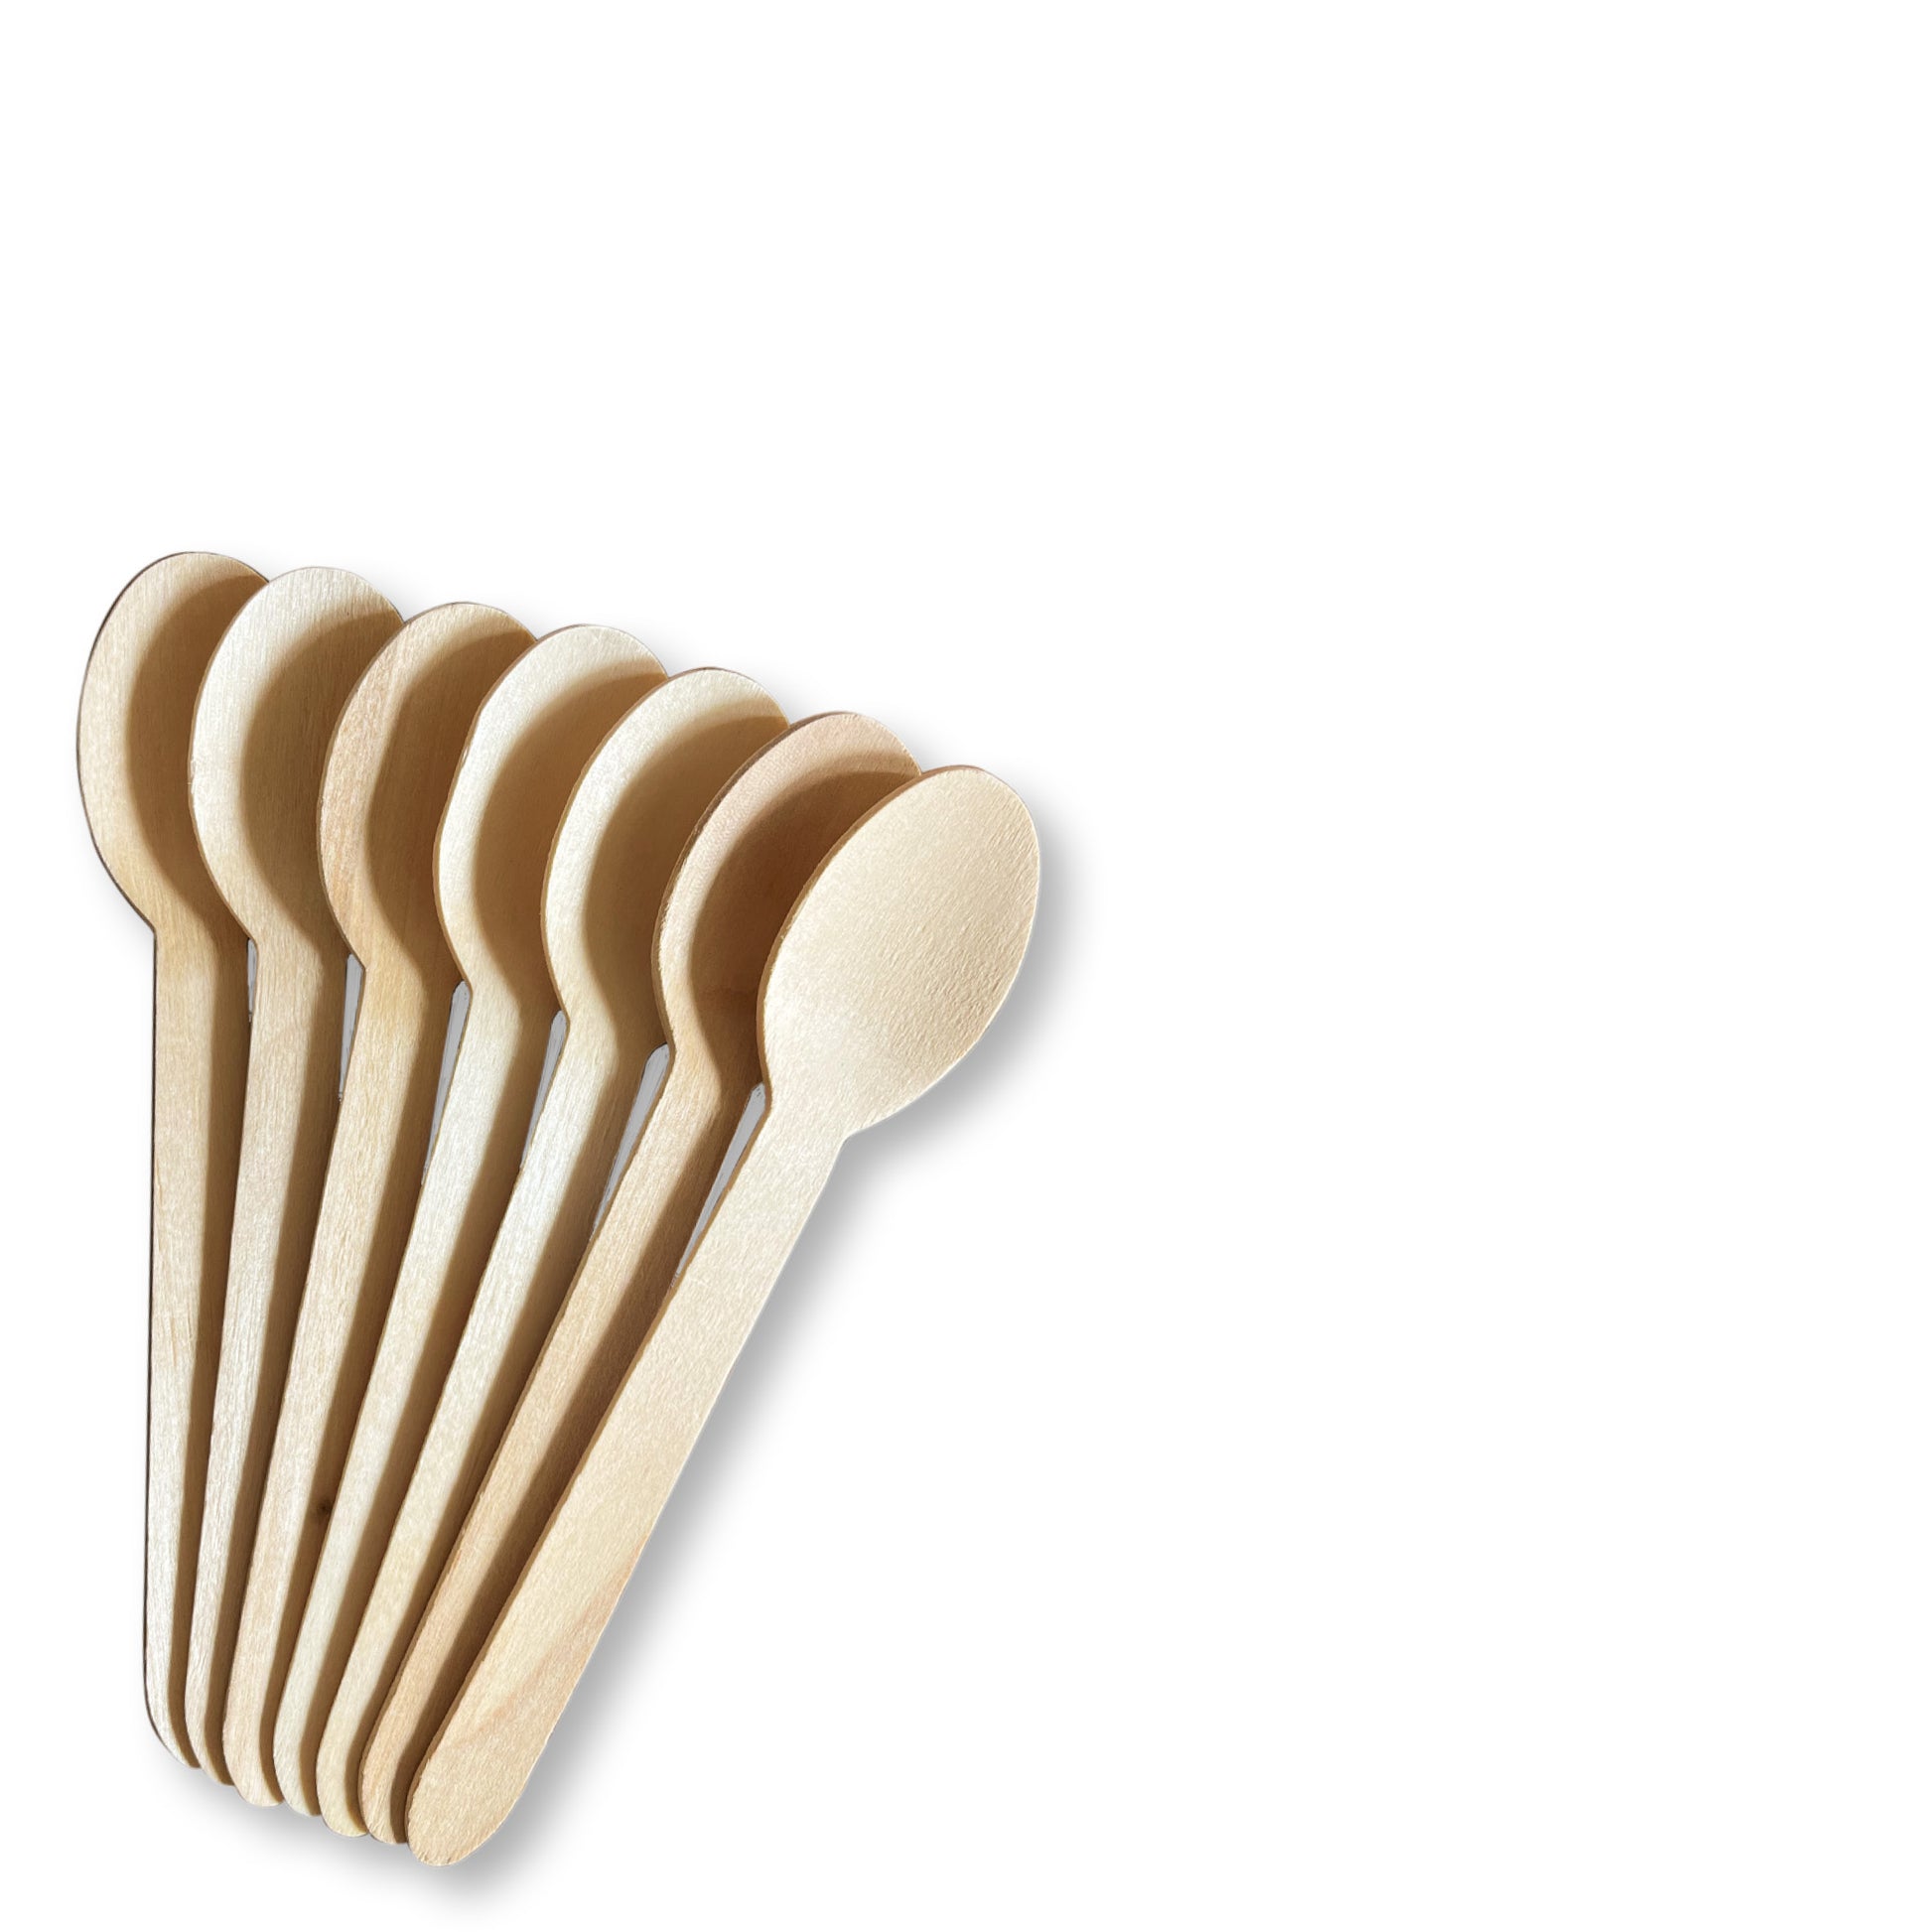 Palm Leaf Plates Disposable Cutlery from natural birch is a unique alternative to other disposable TEA SPOONS  on the market.